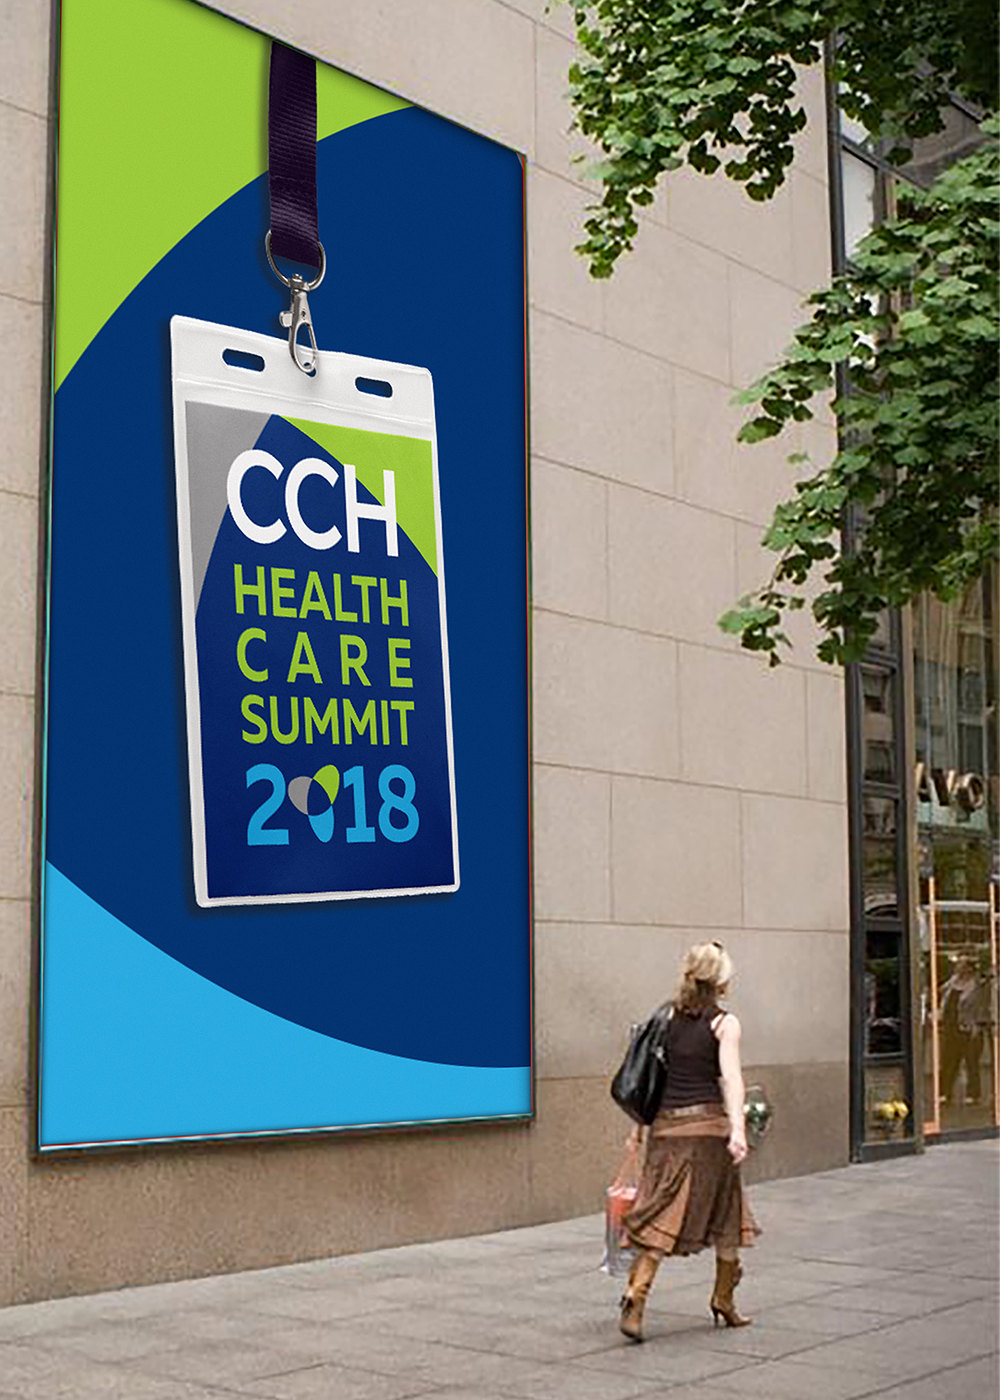 CCH Healthcare Wall Ad - iDesign Branding